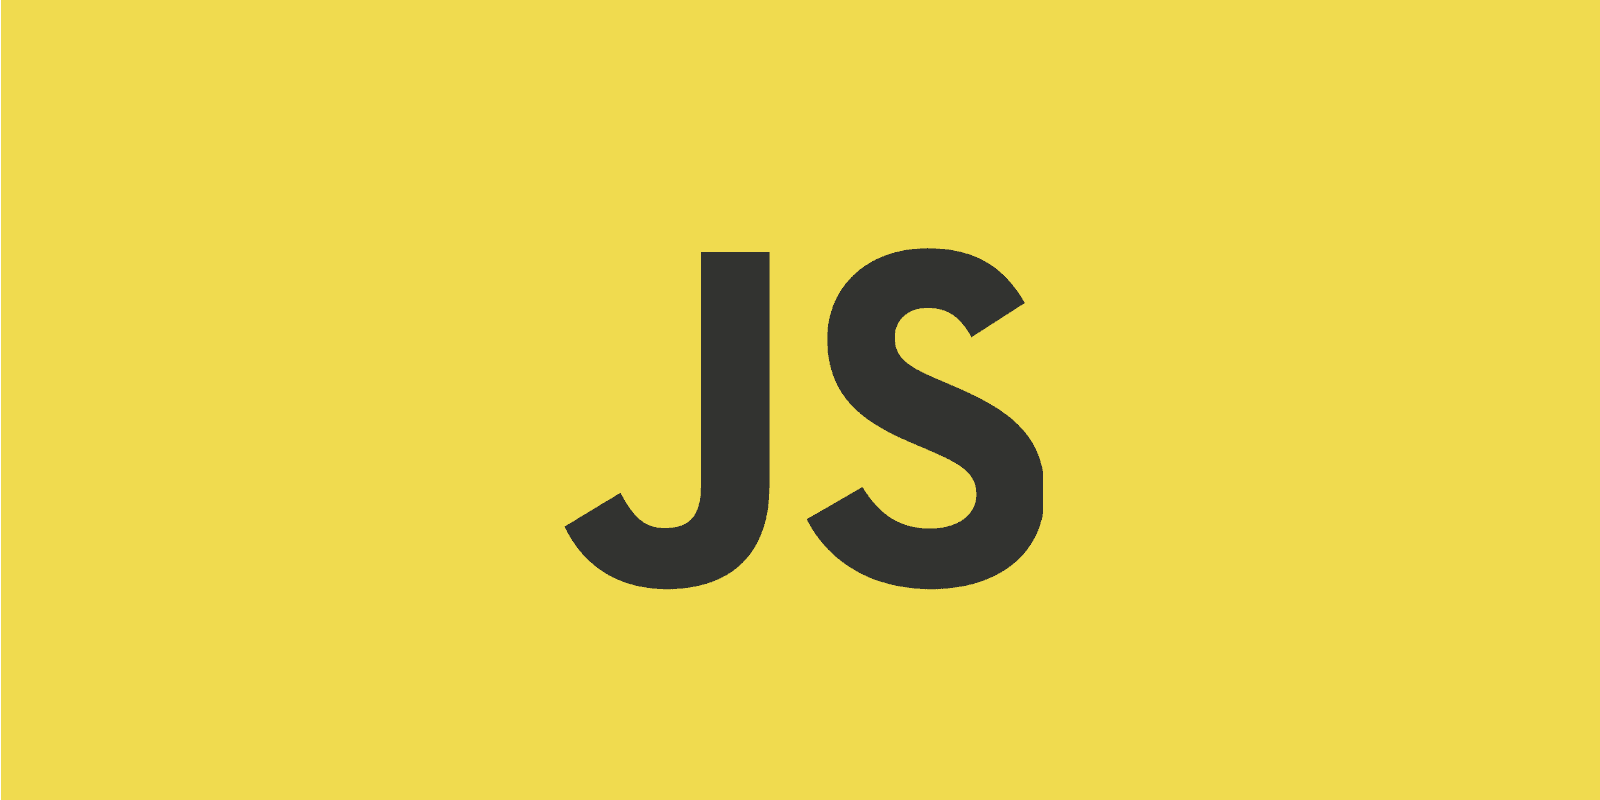 How to copy/clone arrays in javascript